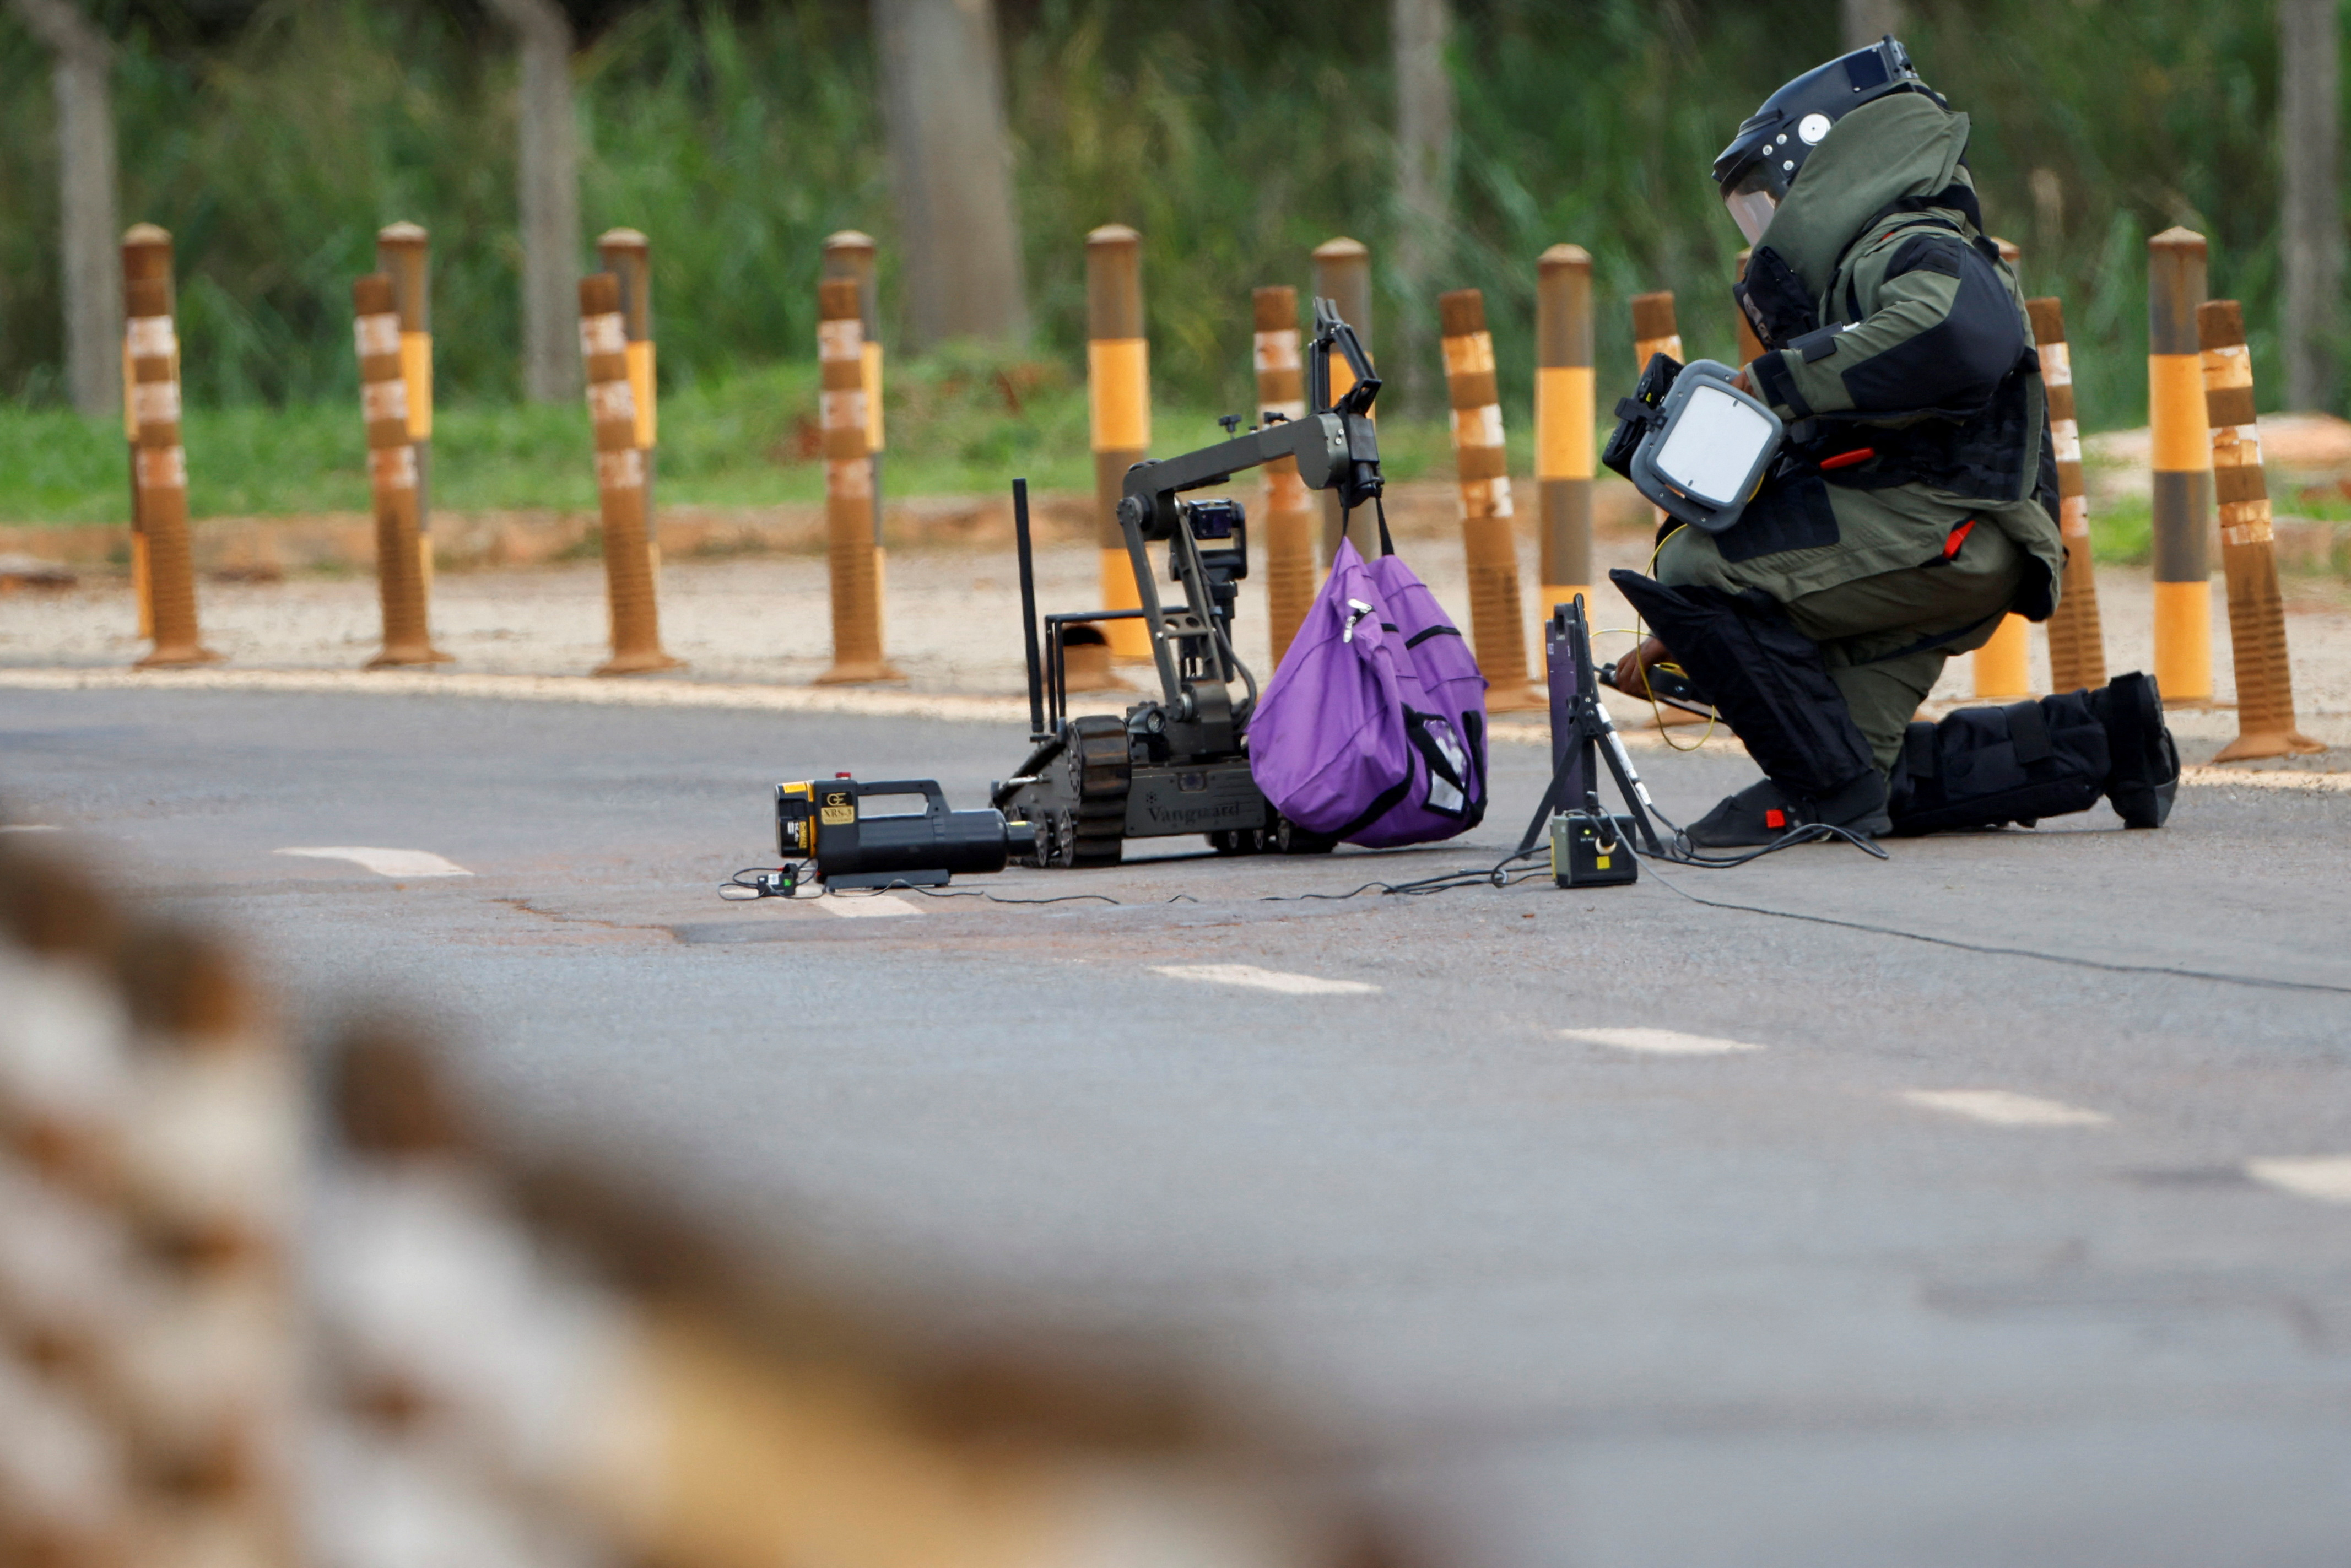 A member of the anti-bomb group of the Federal police work in Brasilia